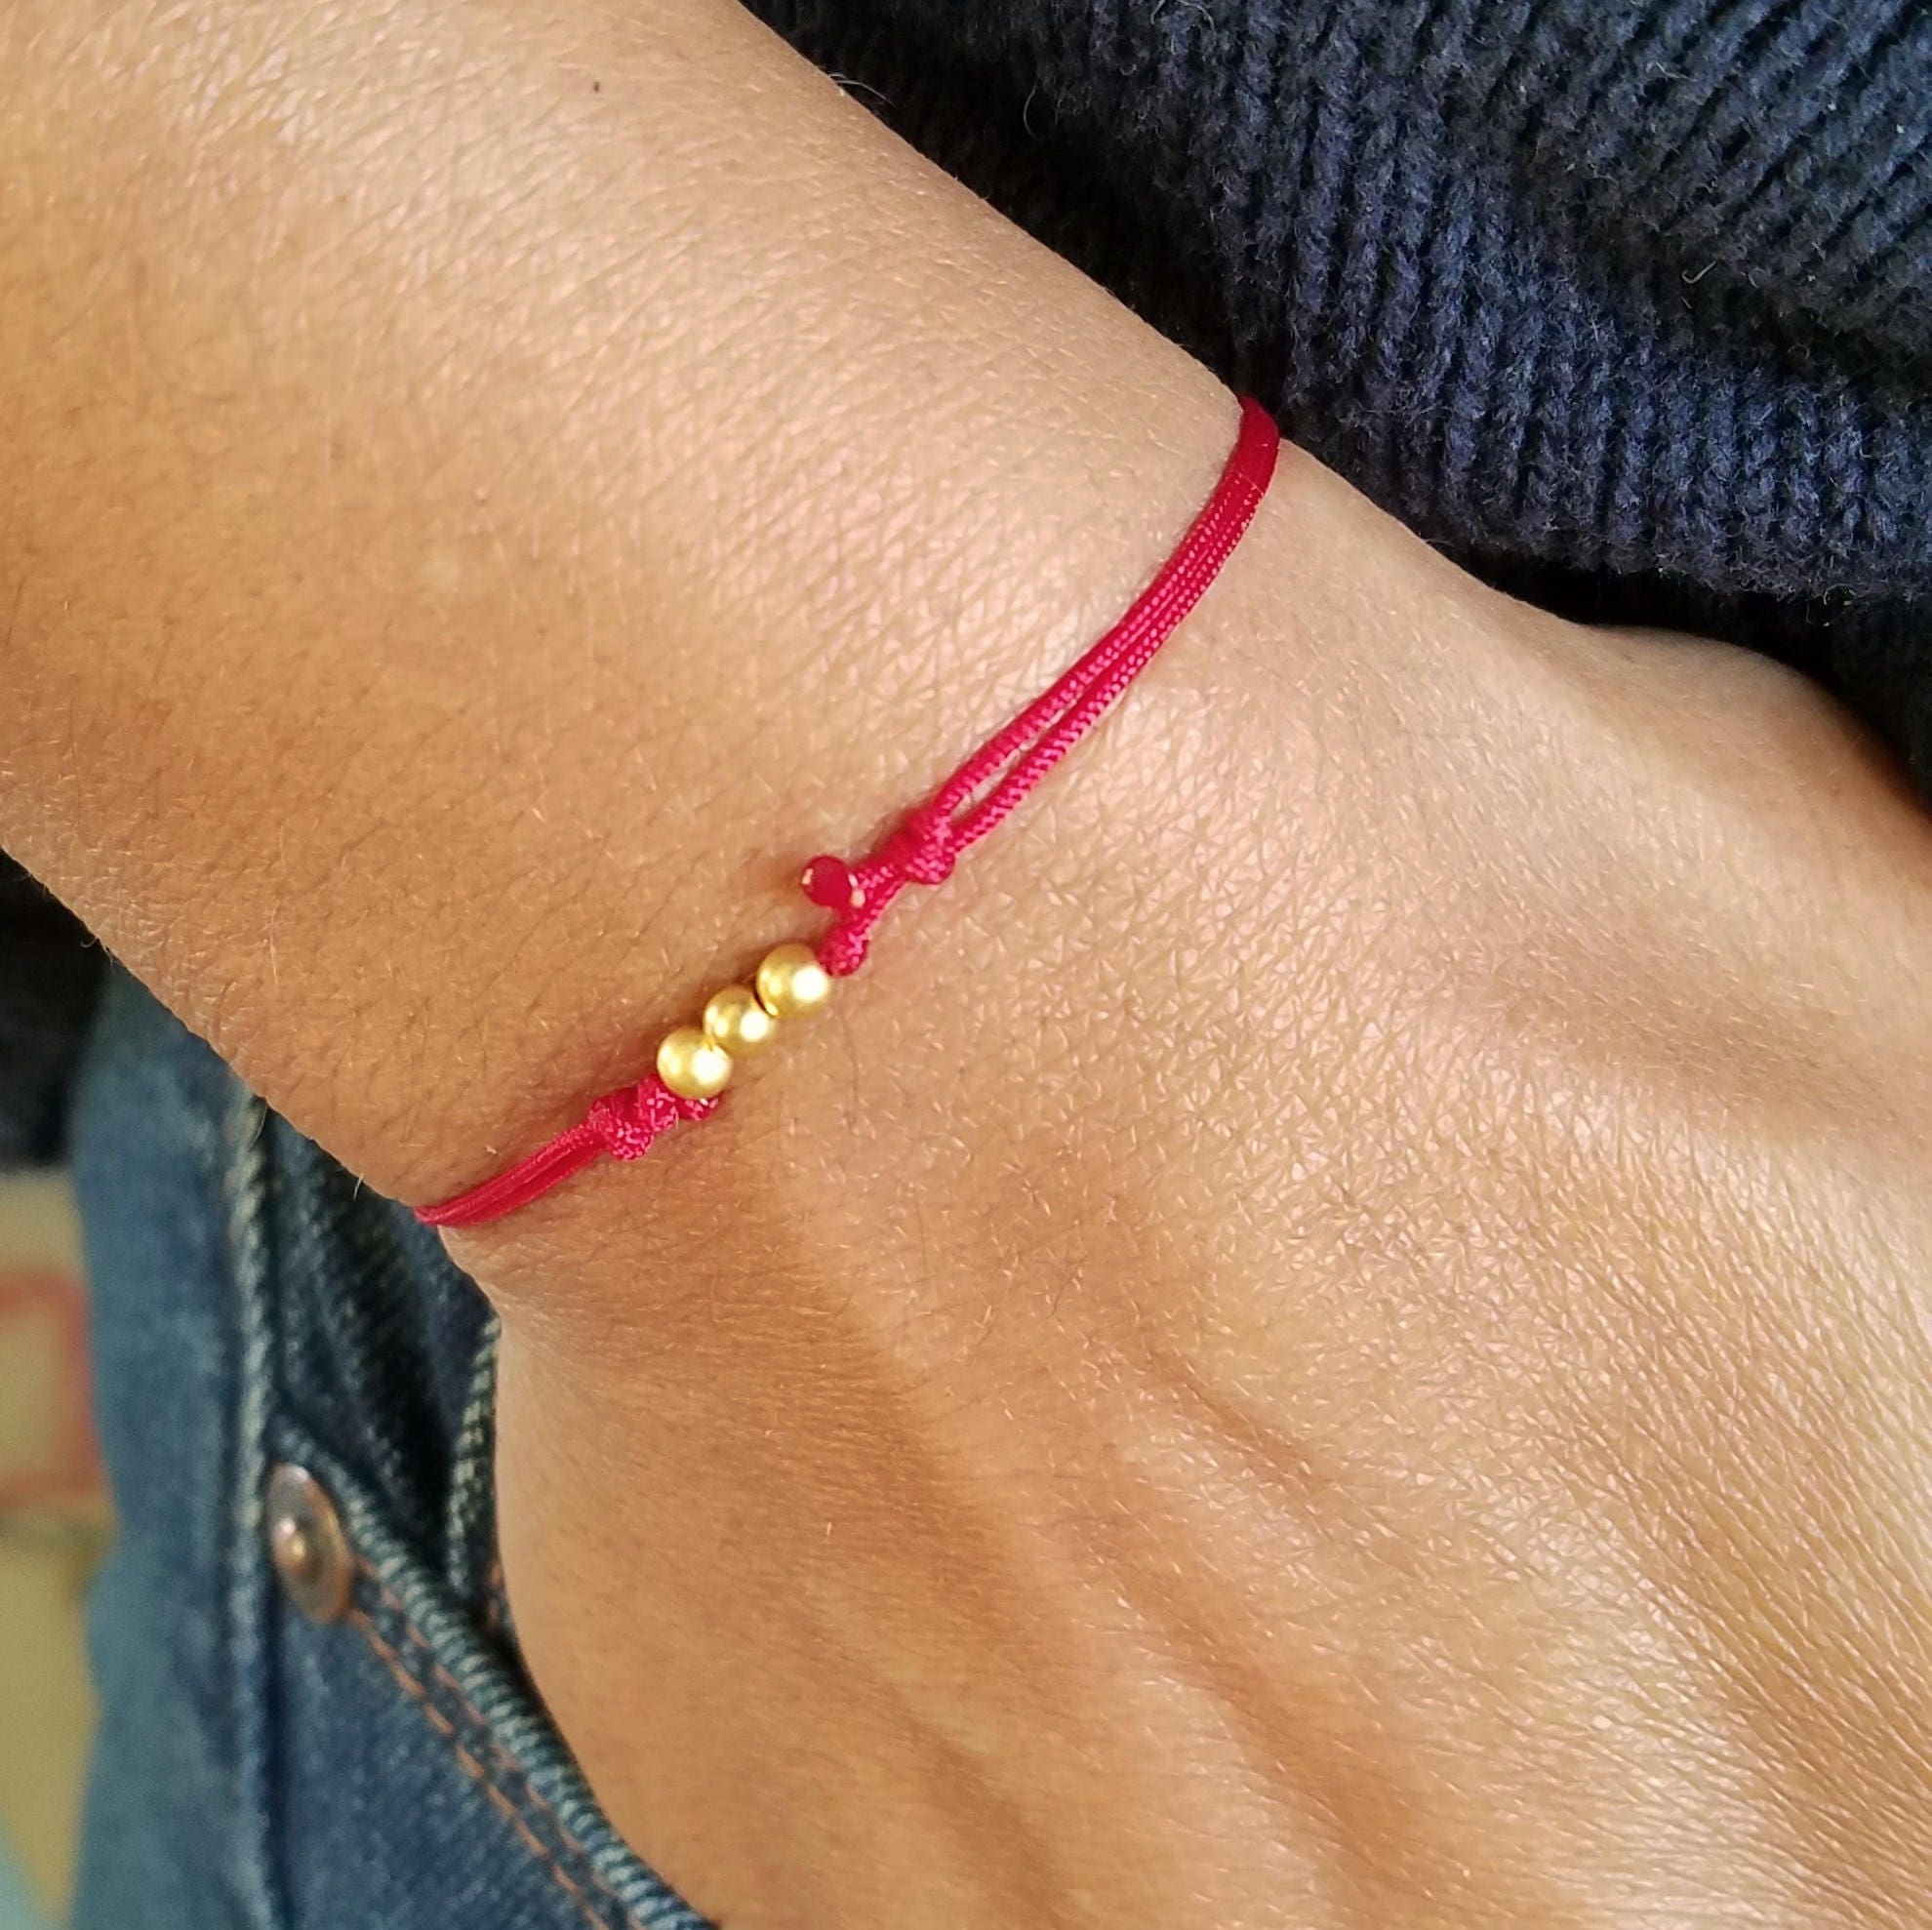 Buy Yashvin Brand Hand Made KALAVA with SWASTIK Set of 2 | Swastik Band  Fashion Beaded Red Bracelet for Girls/Boys Synthetic Plastic Beads at  Amazon.in